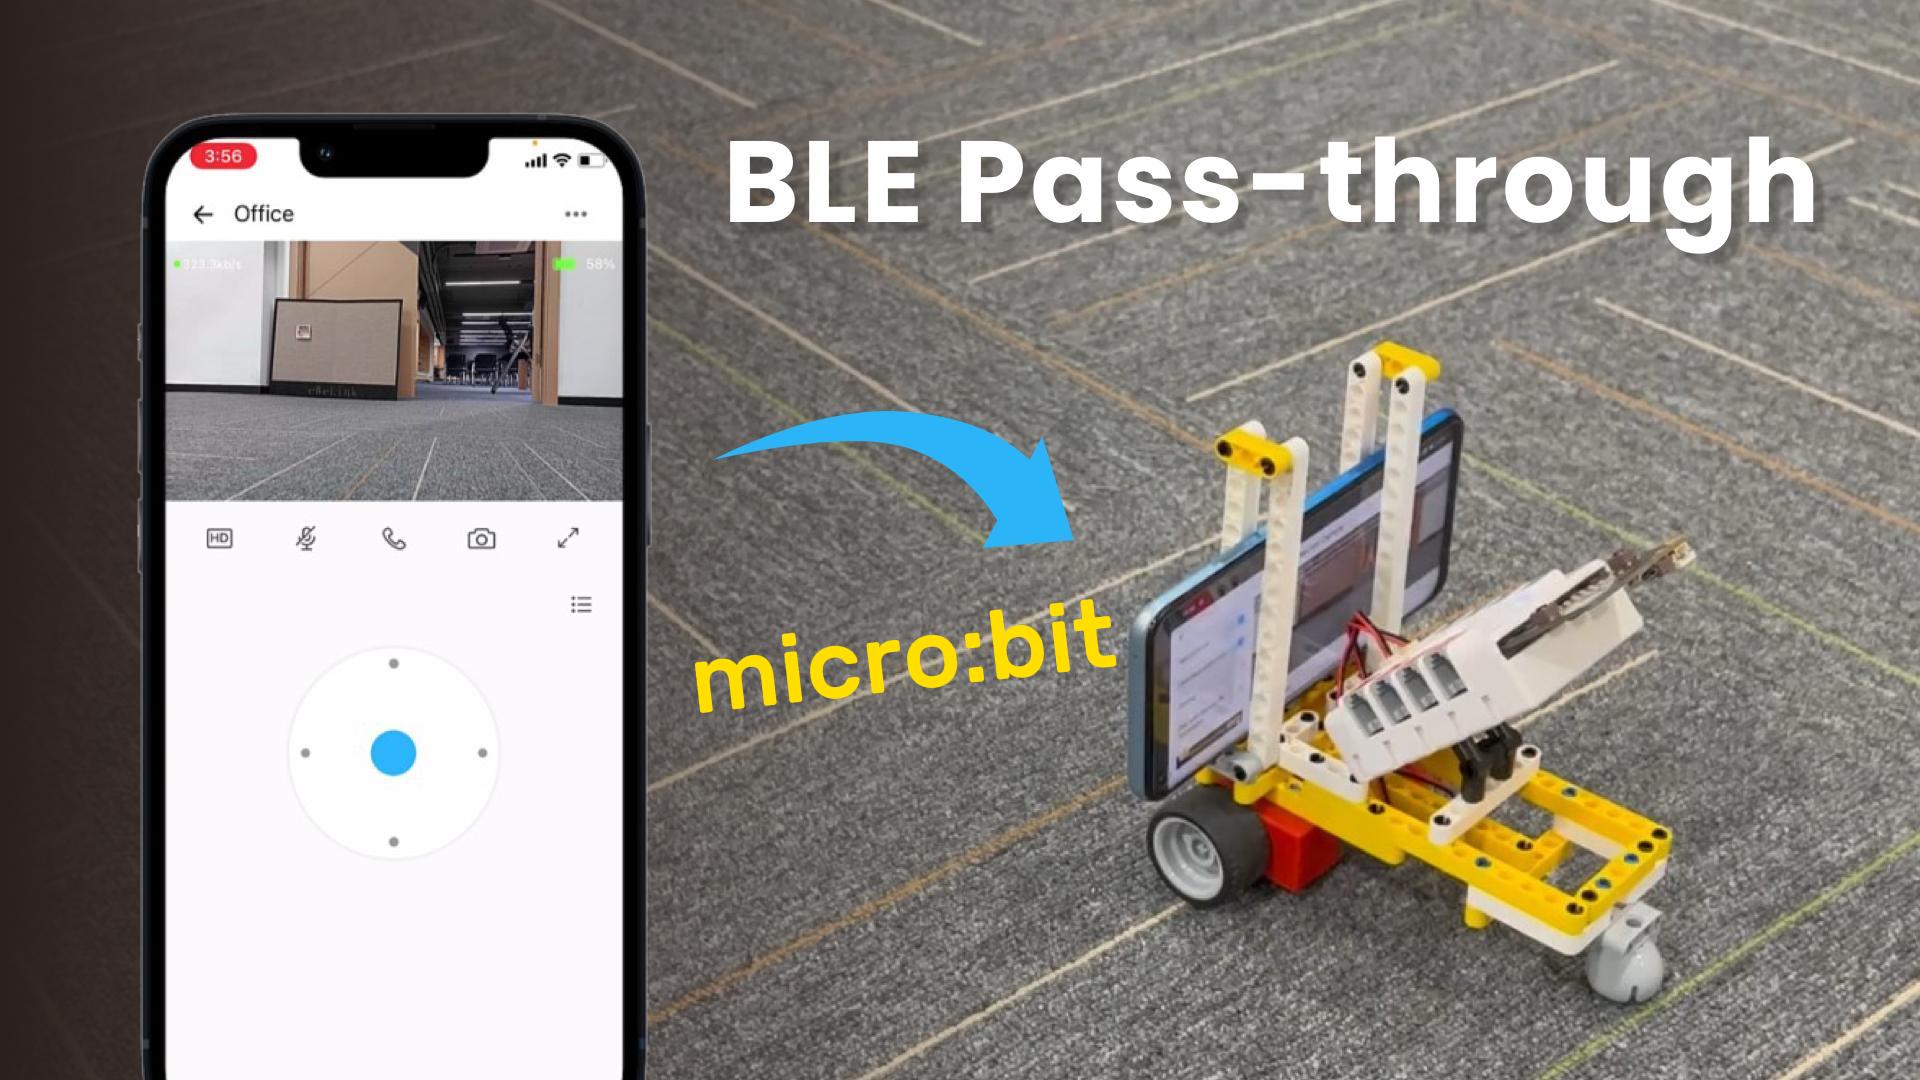 How to use BLE to remote control the micro:bit car?